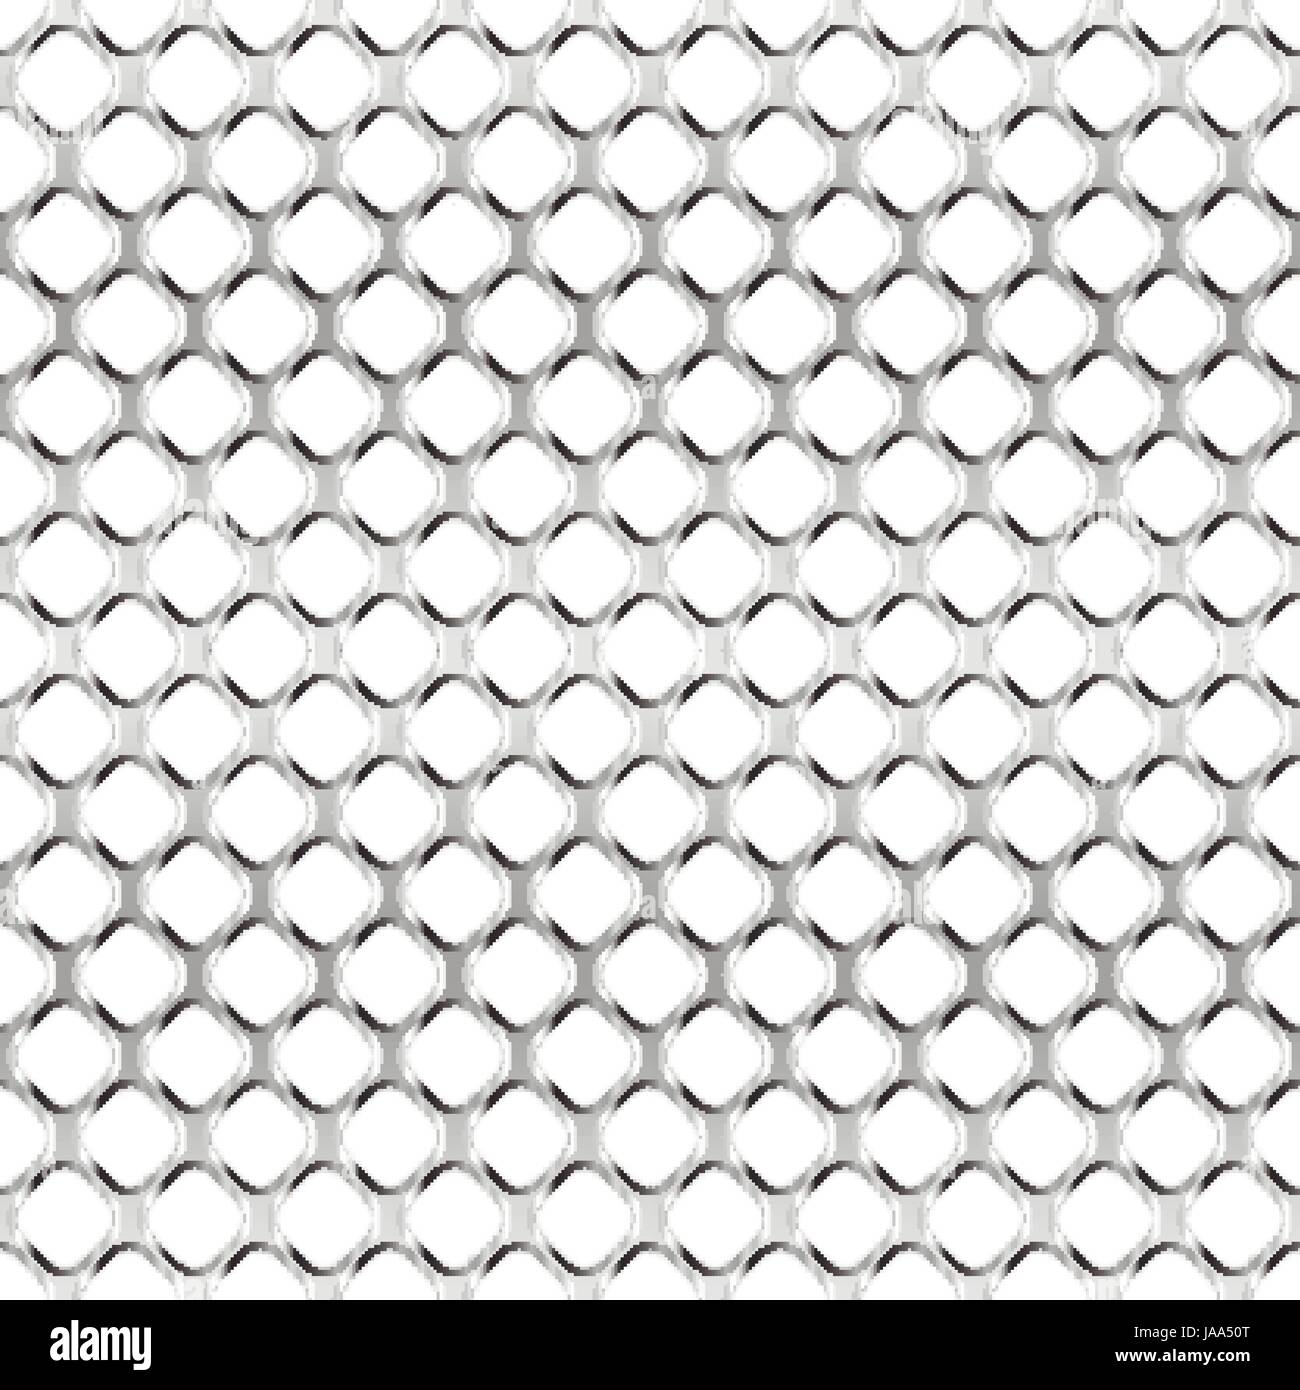 Glossy metal grid with shadow on white, seamless pattern Stock